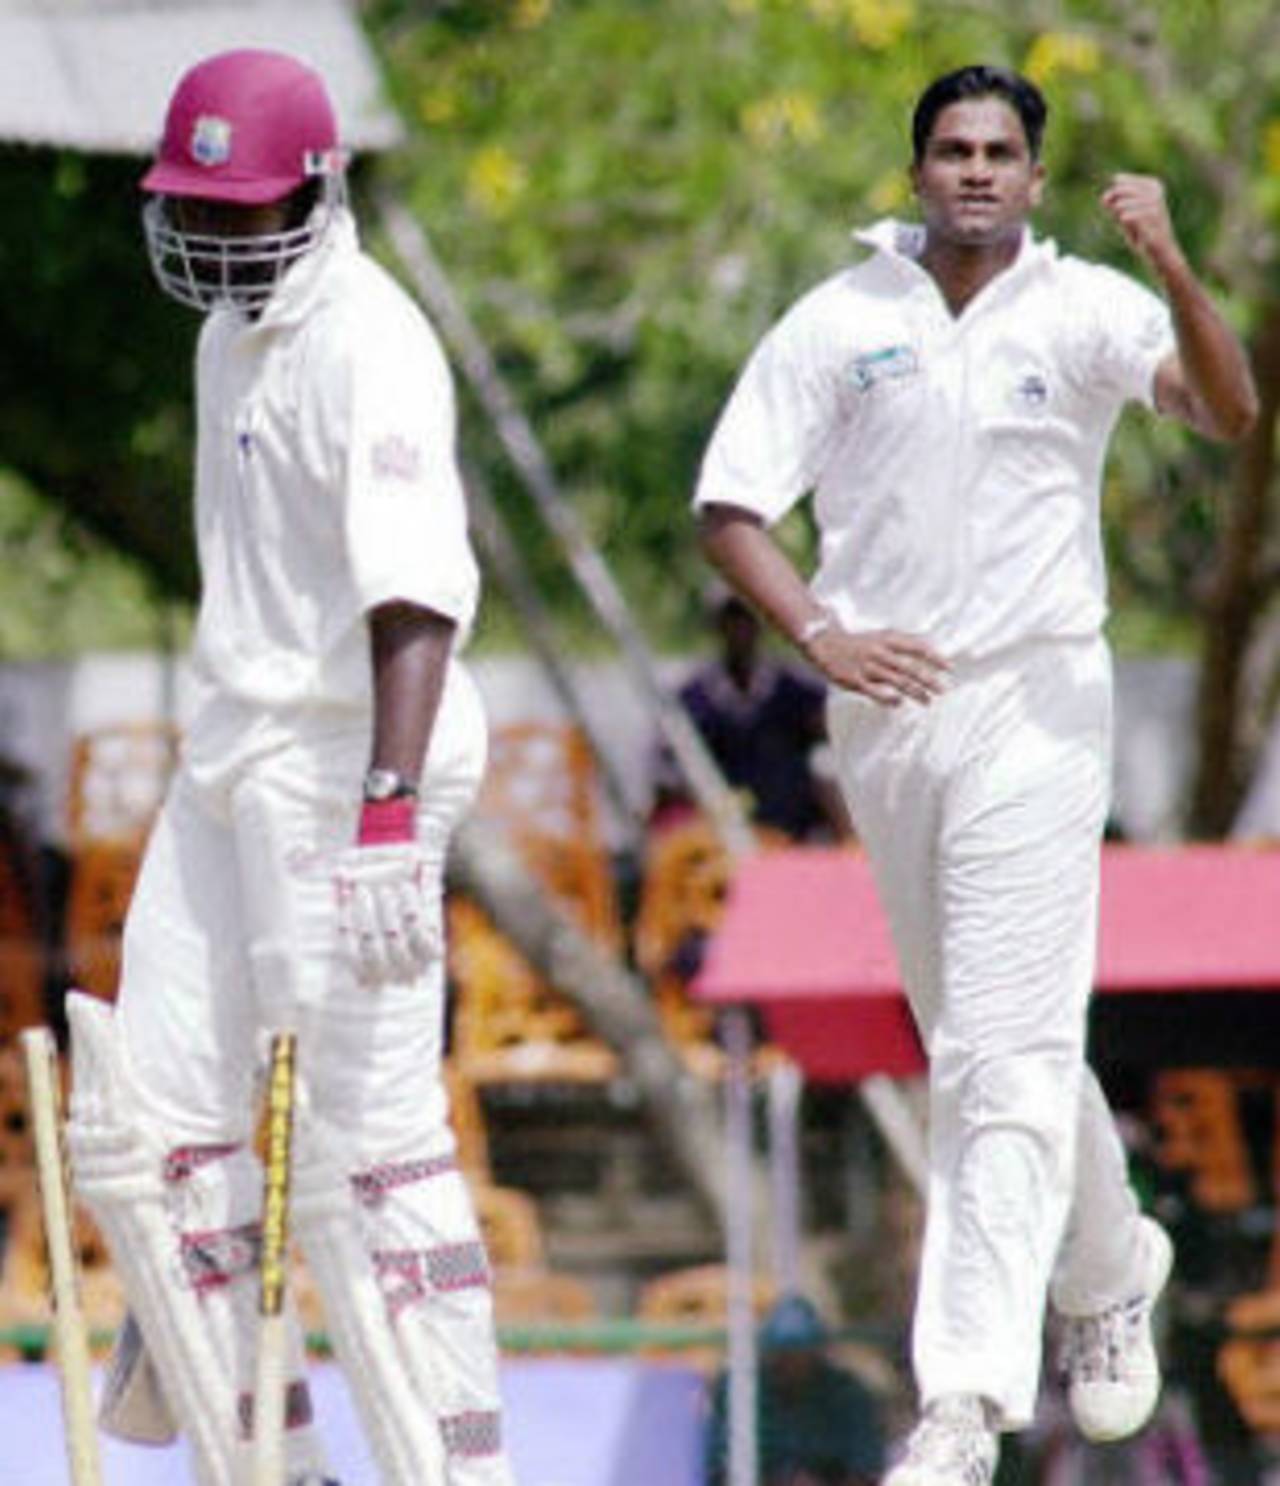 Chris Gayle was one of 11 men to fall for zero in the Kandy Test in 2001-02&nbsp;&nbsp;&bull;&nbsp;&nbsp;Sena Vidanagama/AFP